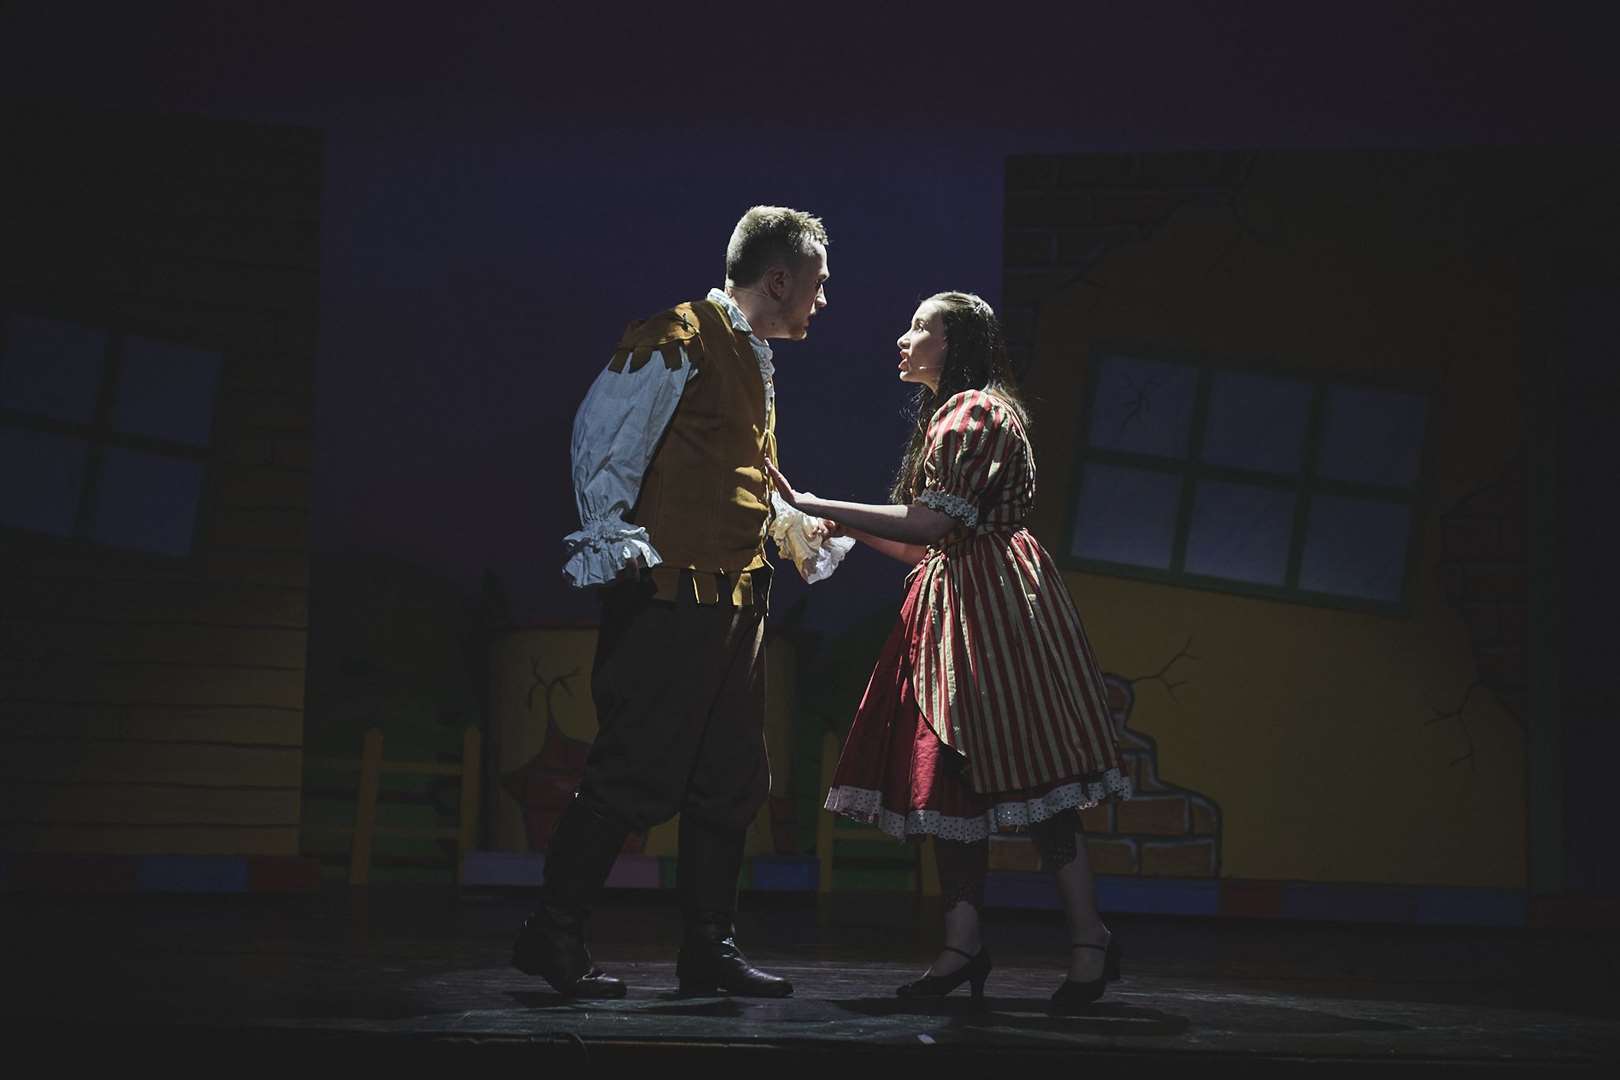 The chemistry between Hubert Cox and Jade Bell, playing Jack and Jill, was clear to see. Picture: Jim Roberts (25257765)